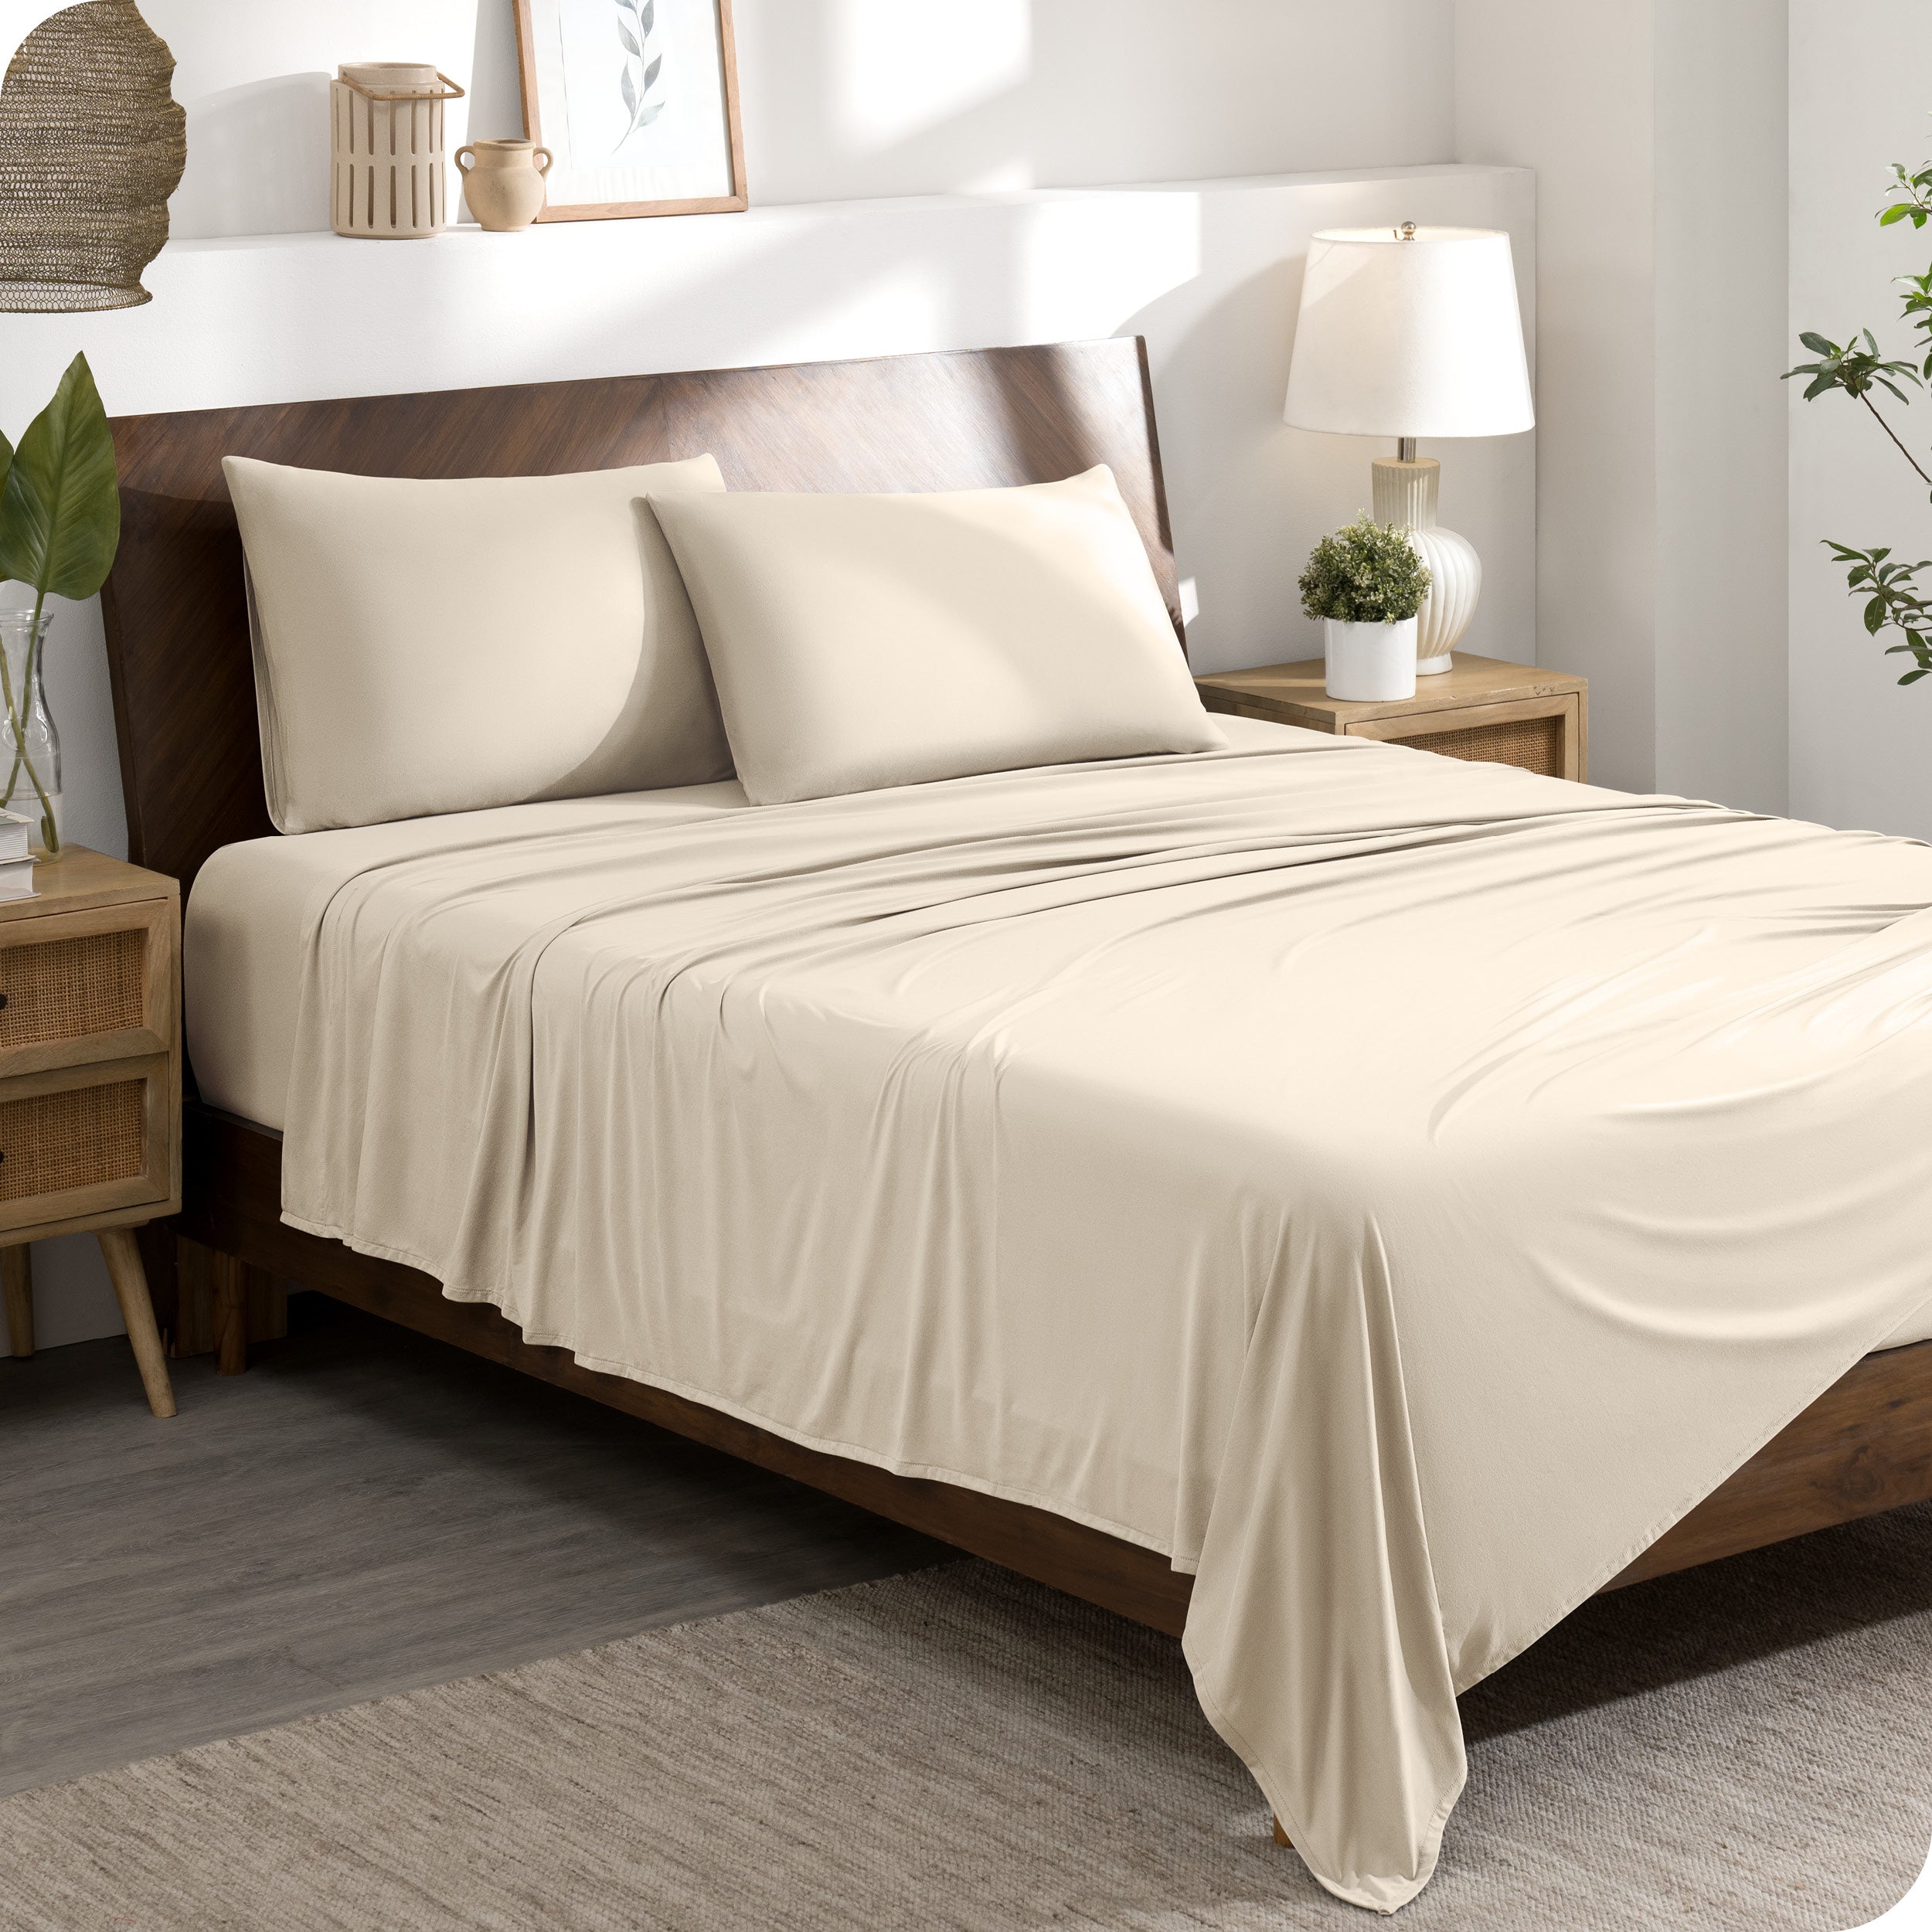 A modern bedroom set with a sand sheet set on the bed